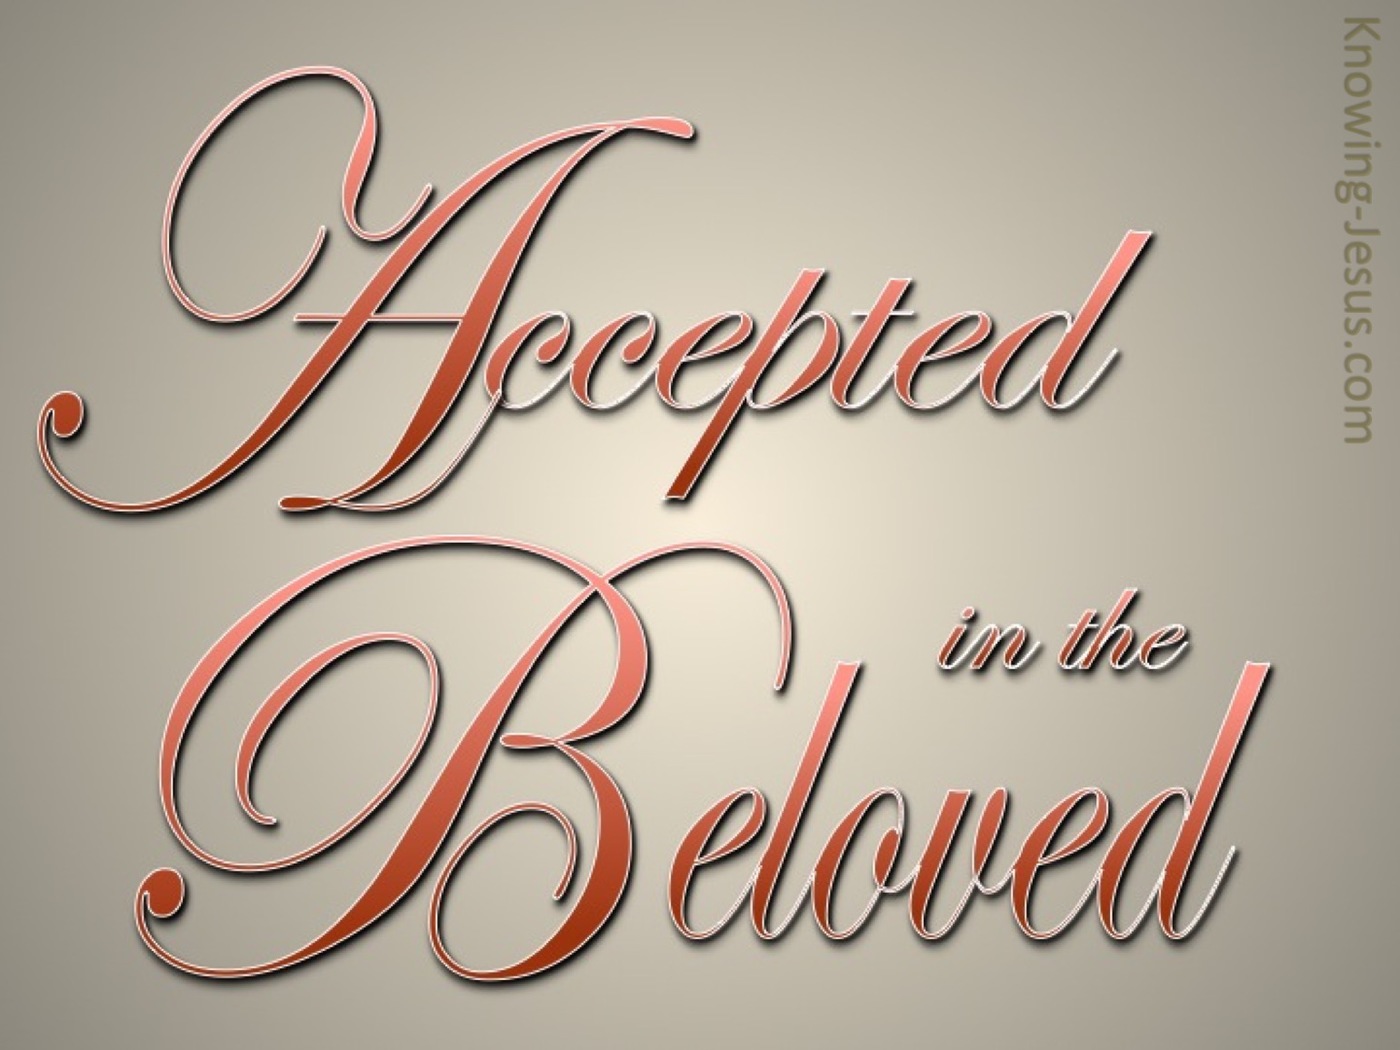 Ephesians 1:6 Accepted In Te Beloved (gray)